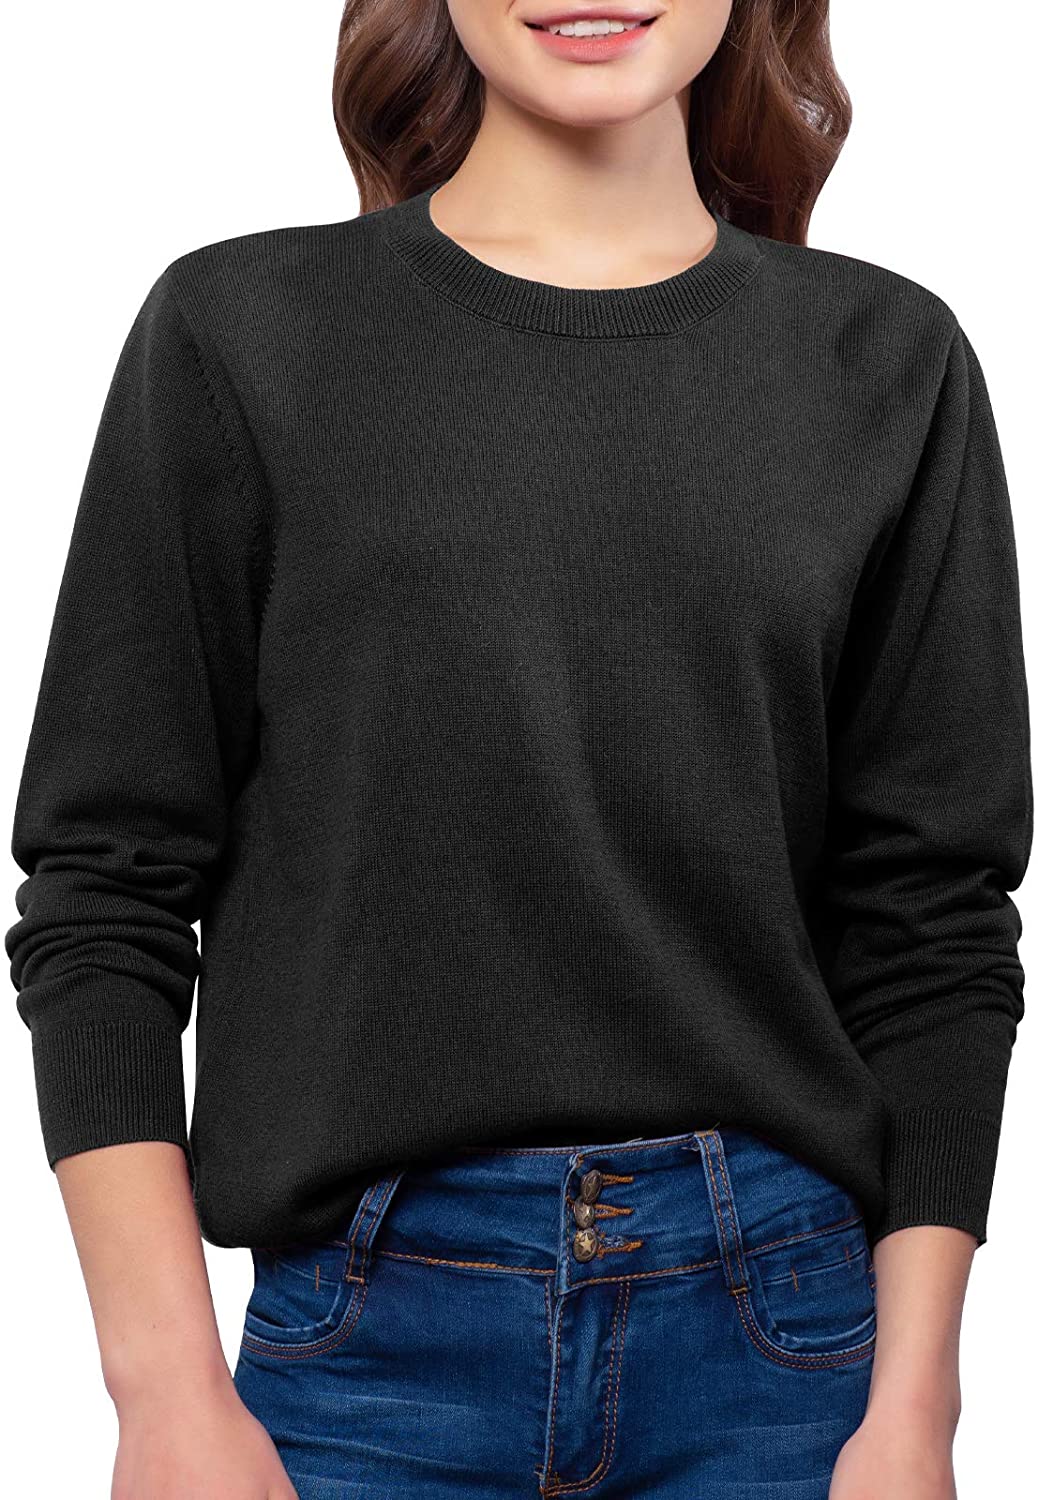 QUALFORT Women's Jumpers Soft Lightweight Knitted Sweaters 